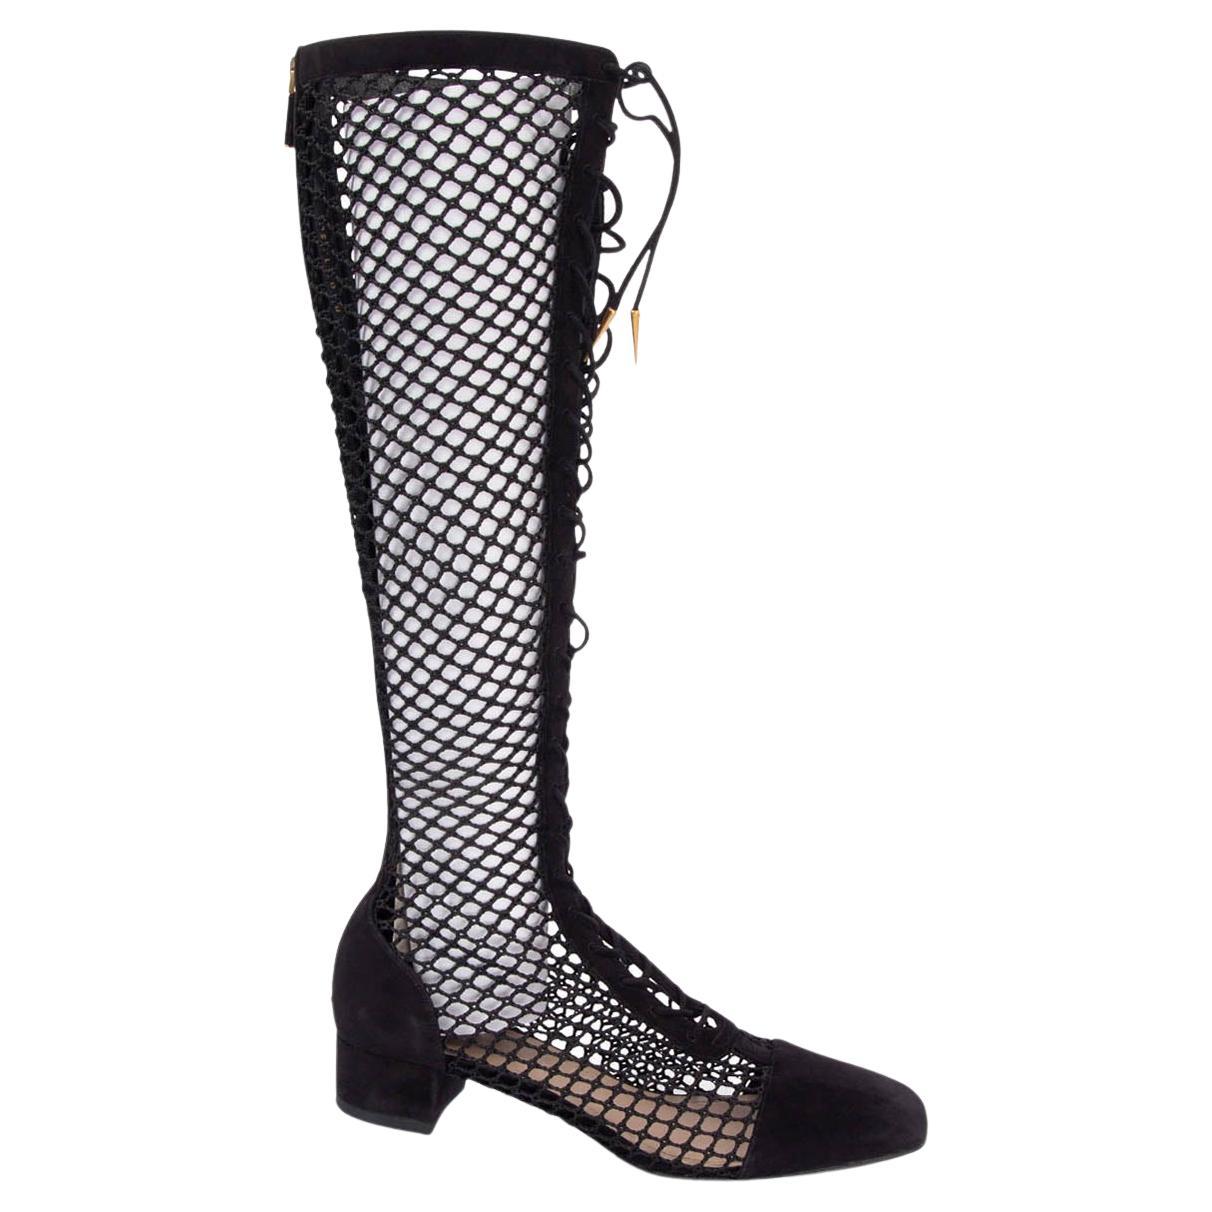 CHRISTIAN DIOR black suede 2018 NAUGHTILY-D FISHNET Boots Shoes 38.5 For Sale